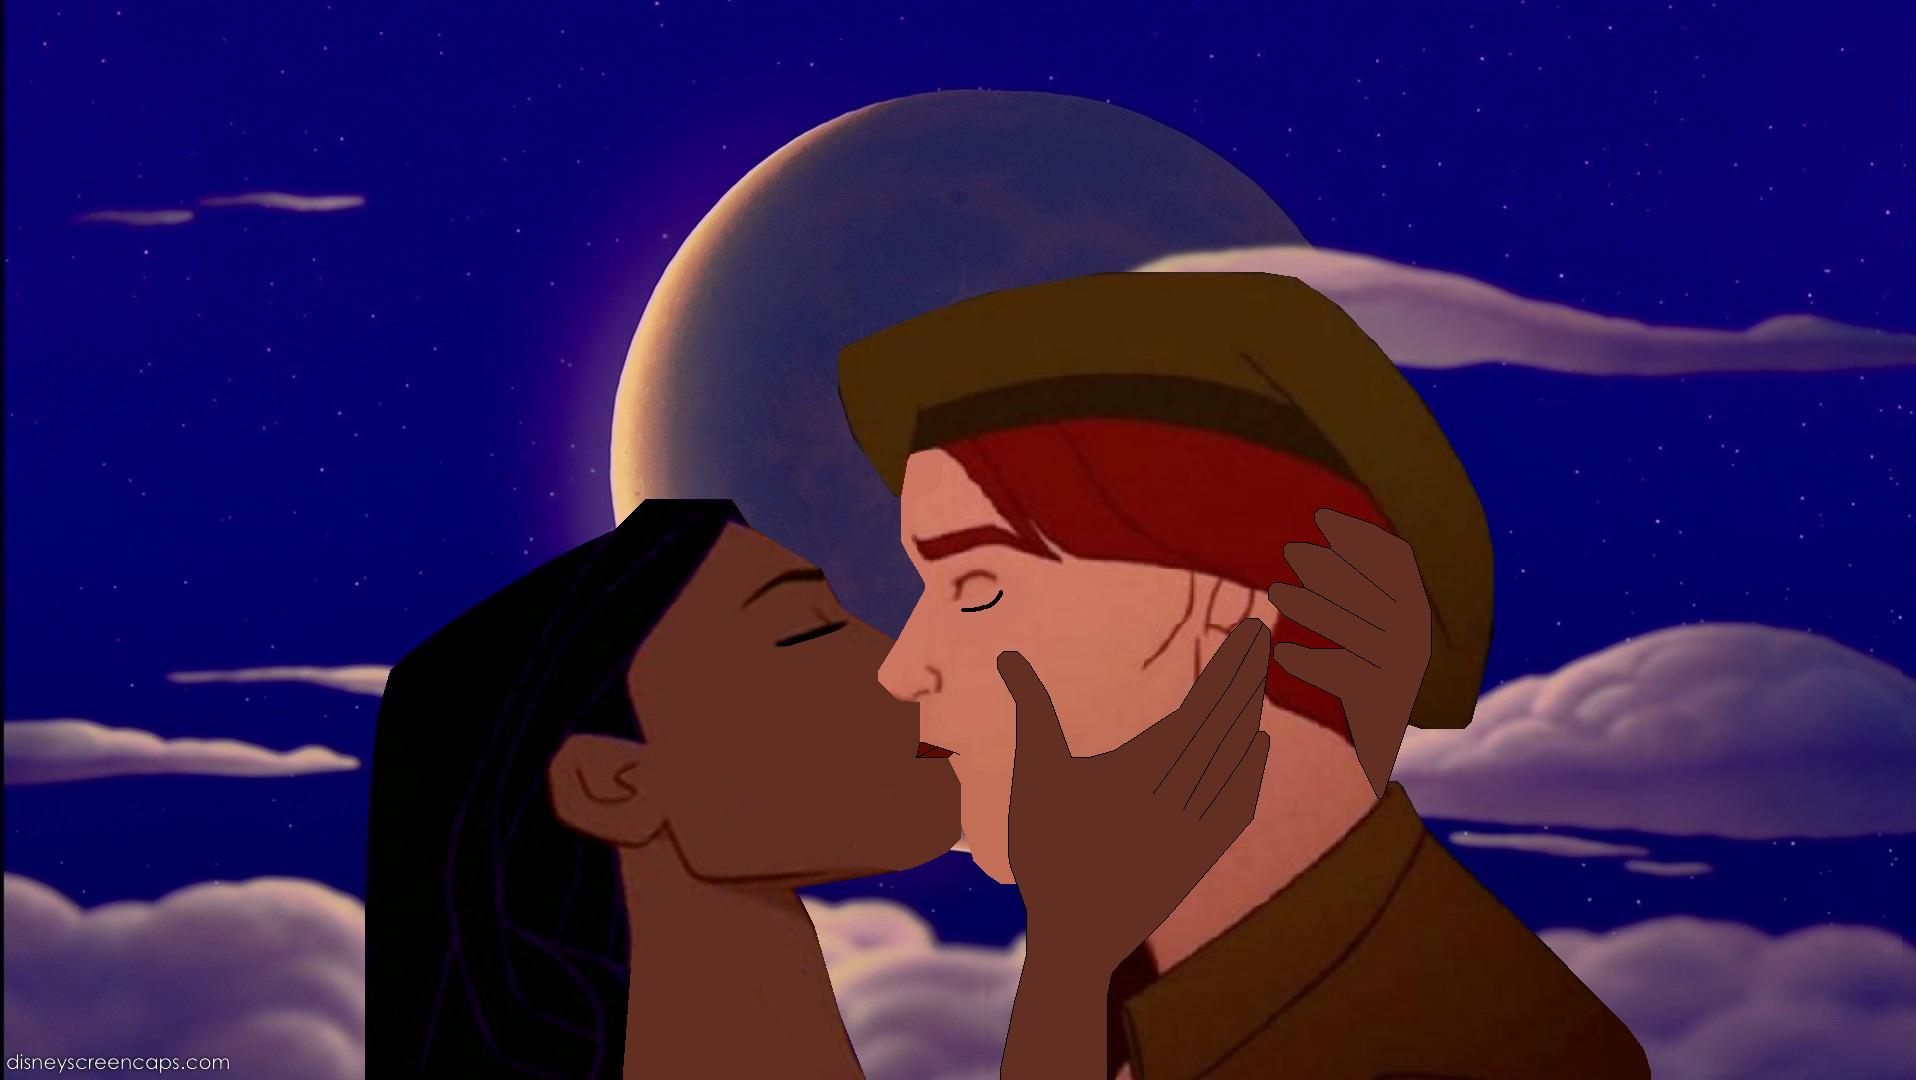 disney crossover Photo: pocahontas and thomas kiss in the night.